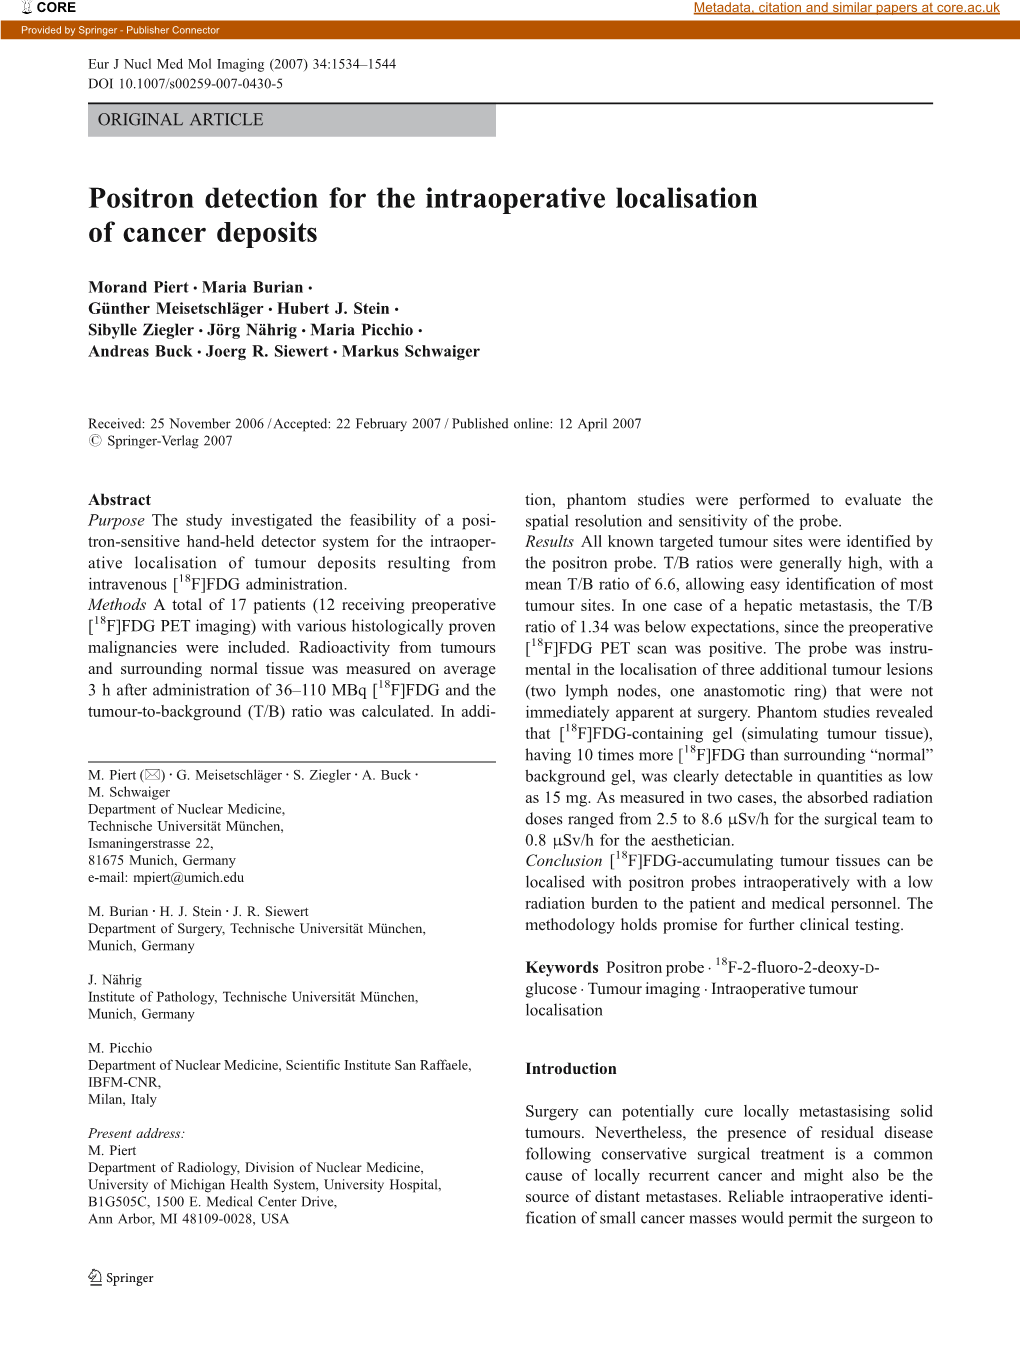 Positron Detection for the Intraoperative Localisation of Cancer Deposits